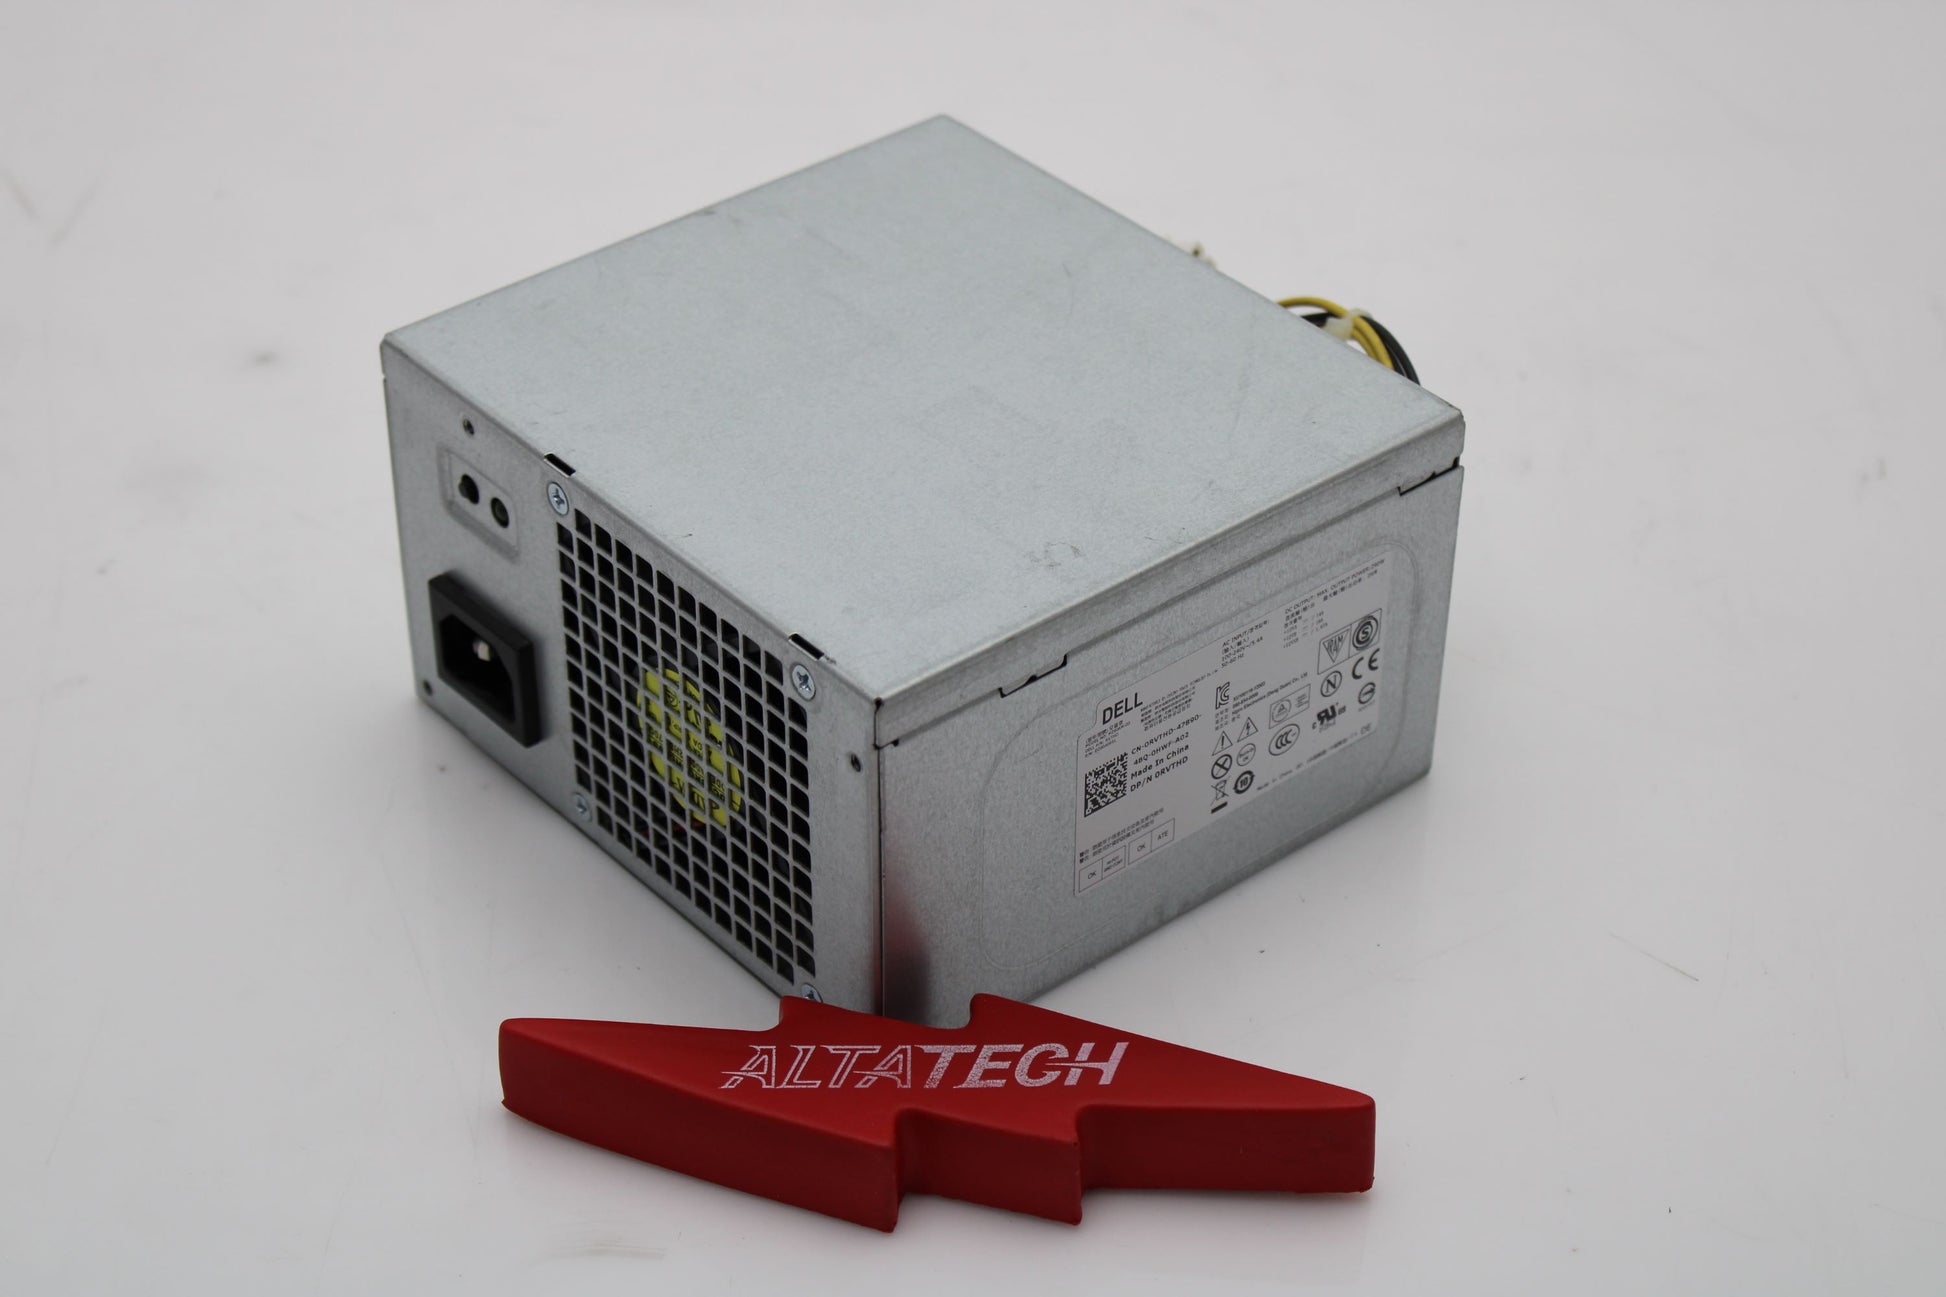 Dell NFX6T 290W POWER OPT 9020 MT, Used